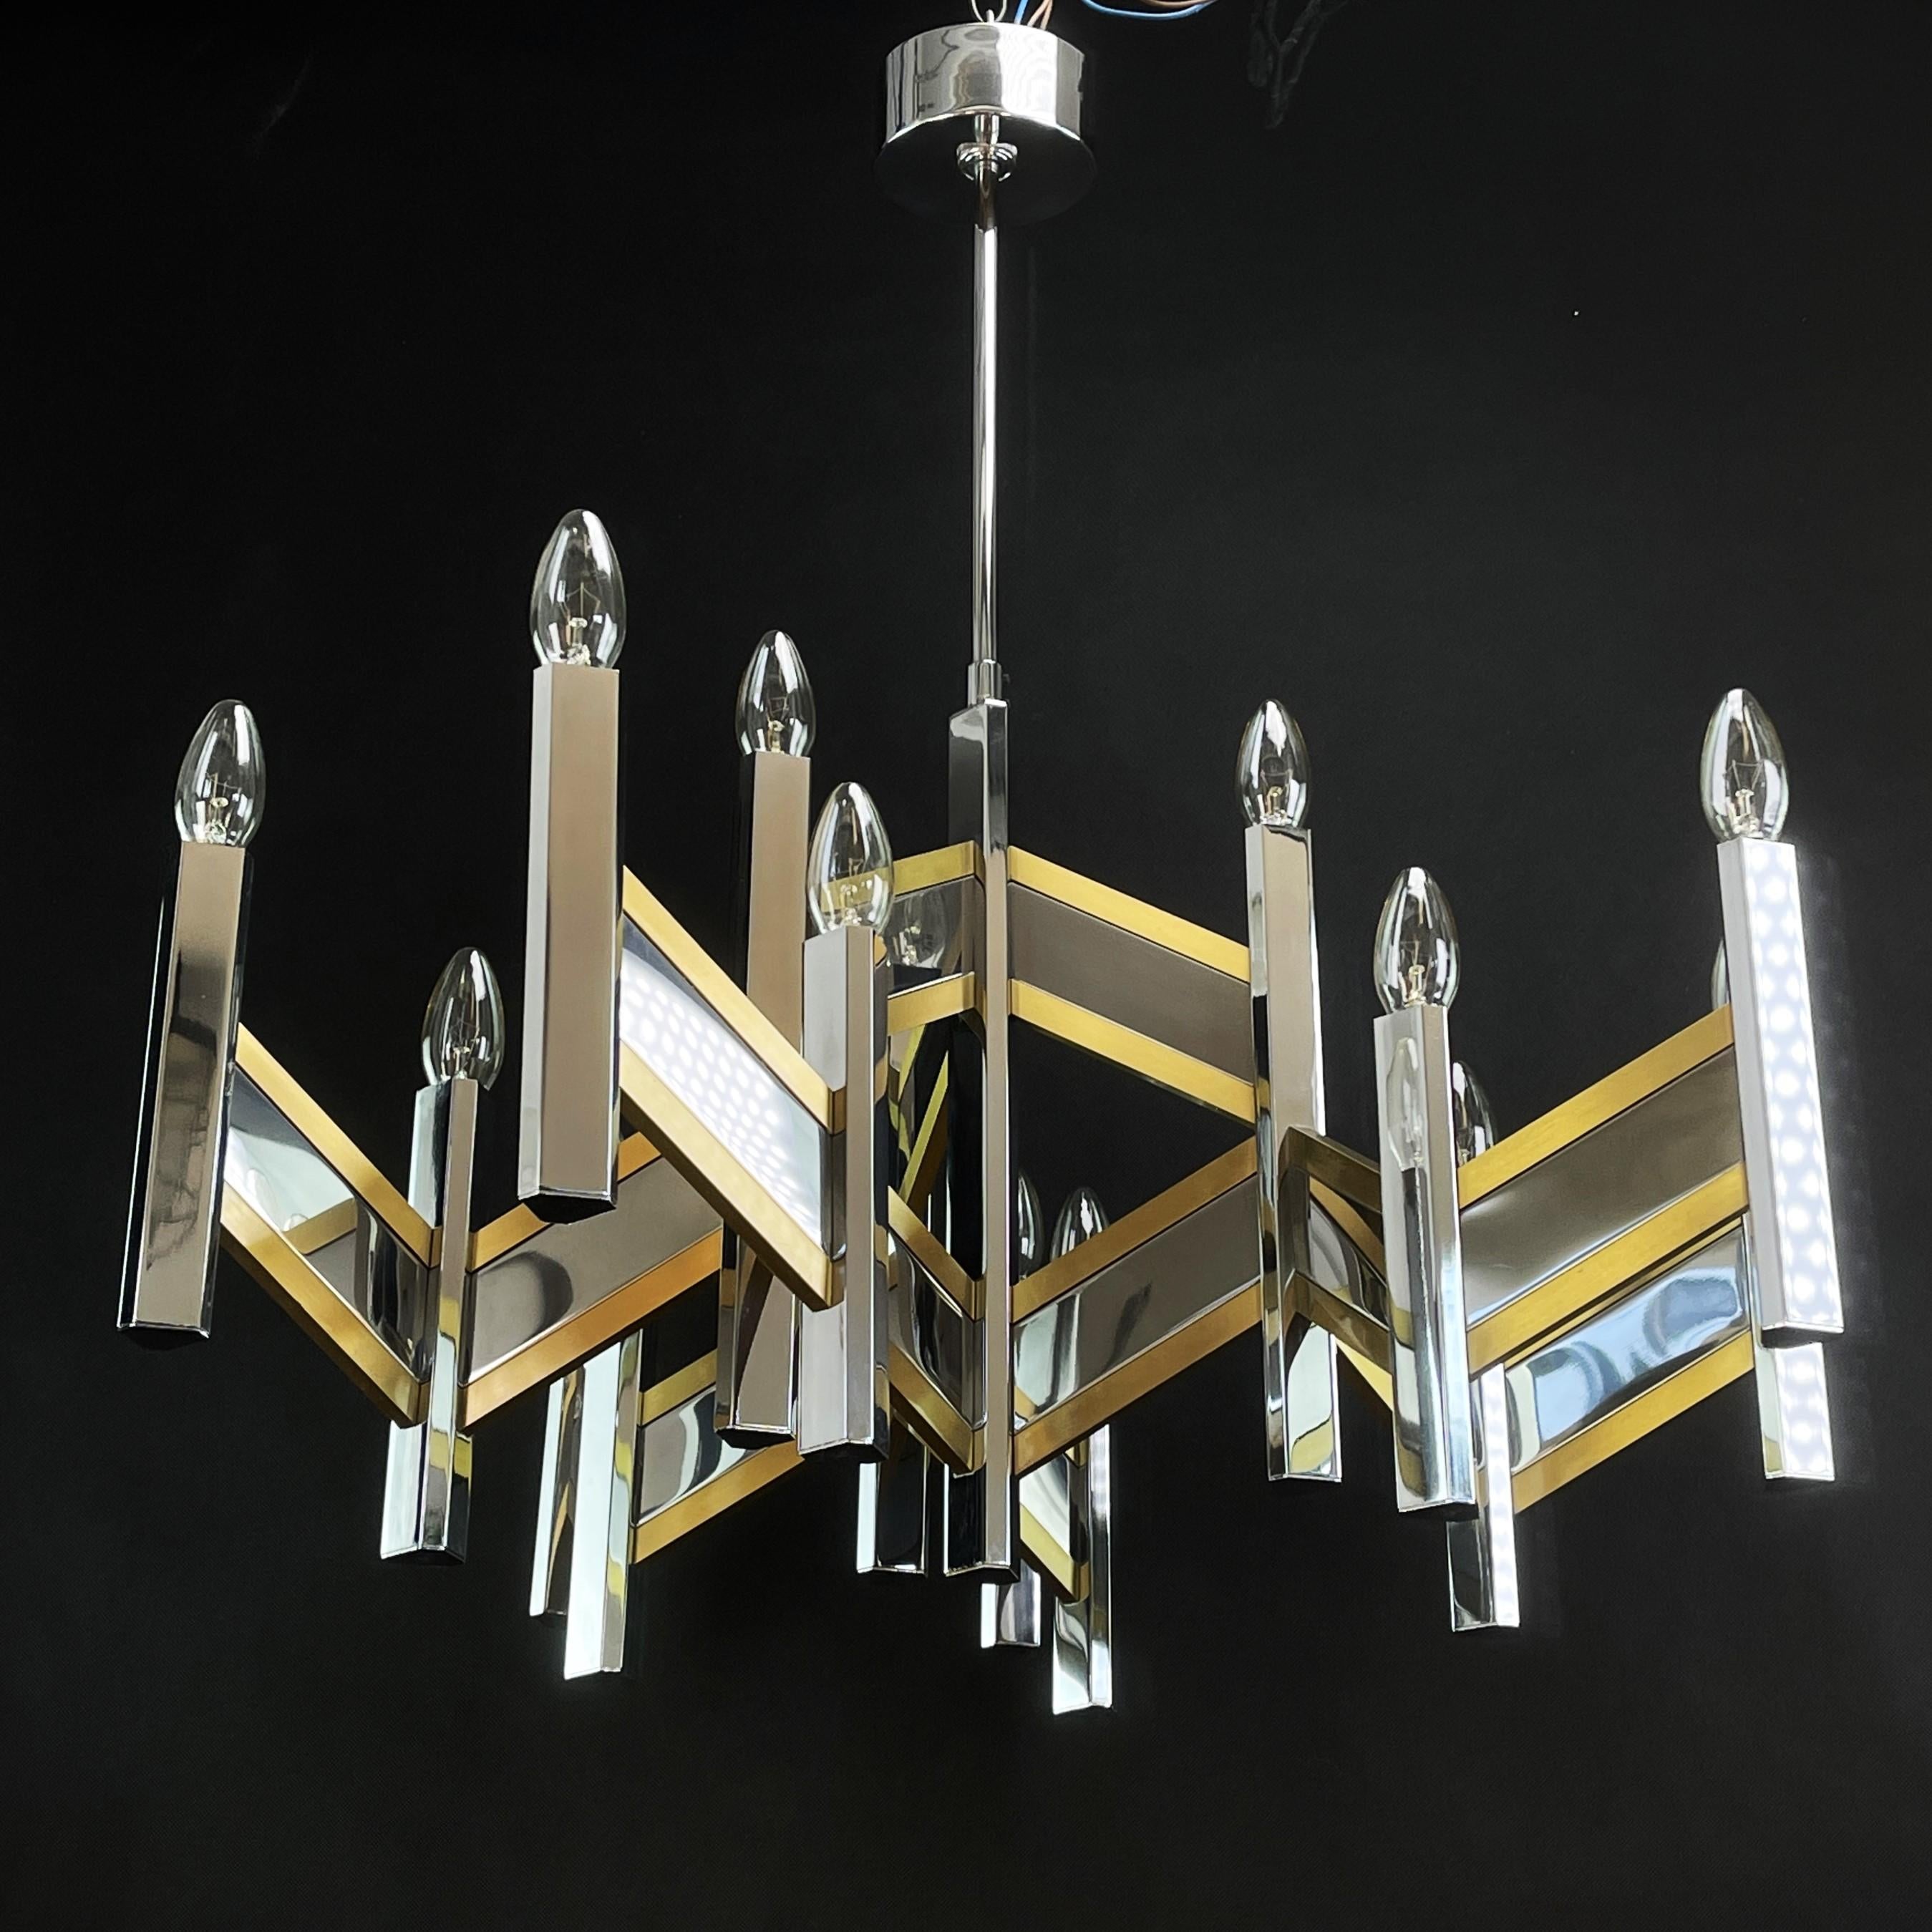 Sputnik ceiling lamp by Sciolari - 1970s.

This large Sputnik lamp is a real design classic from the 1960s-1970s. The lounge lamp by Sciolari is an original and gives a pleasant light. The Italian lamp is made out of chrome and brass plated metal.